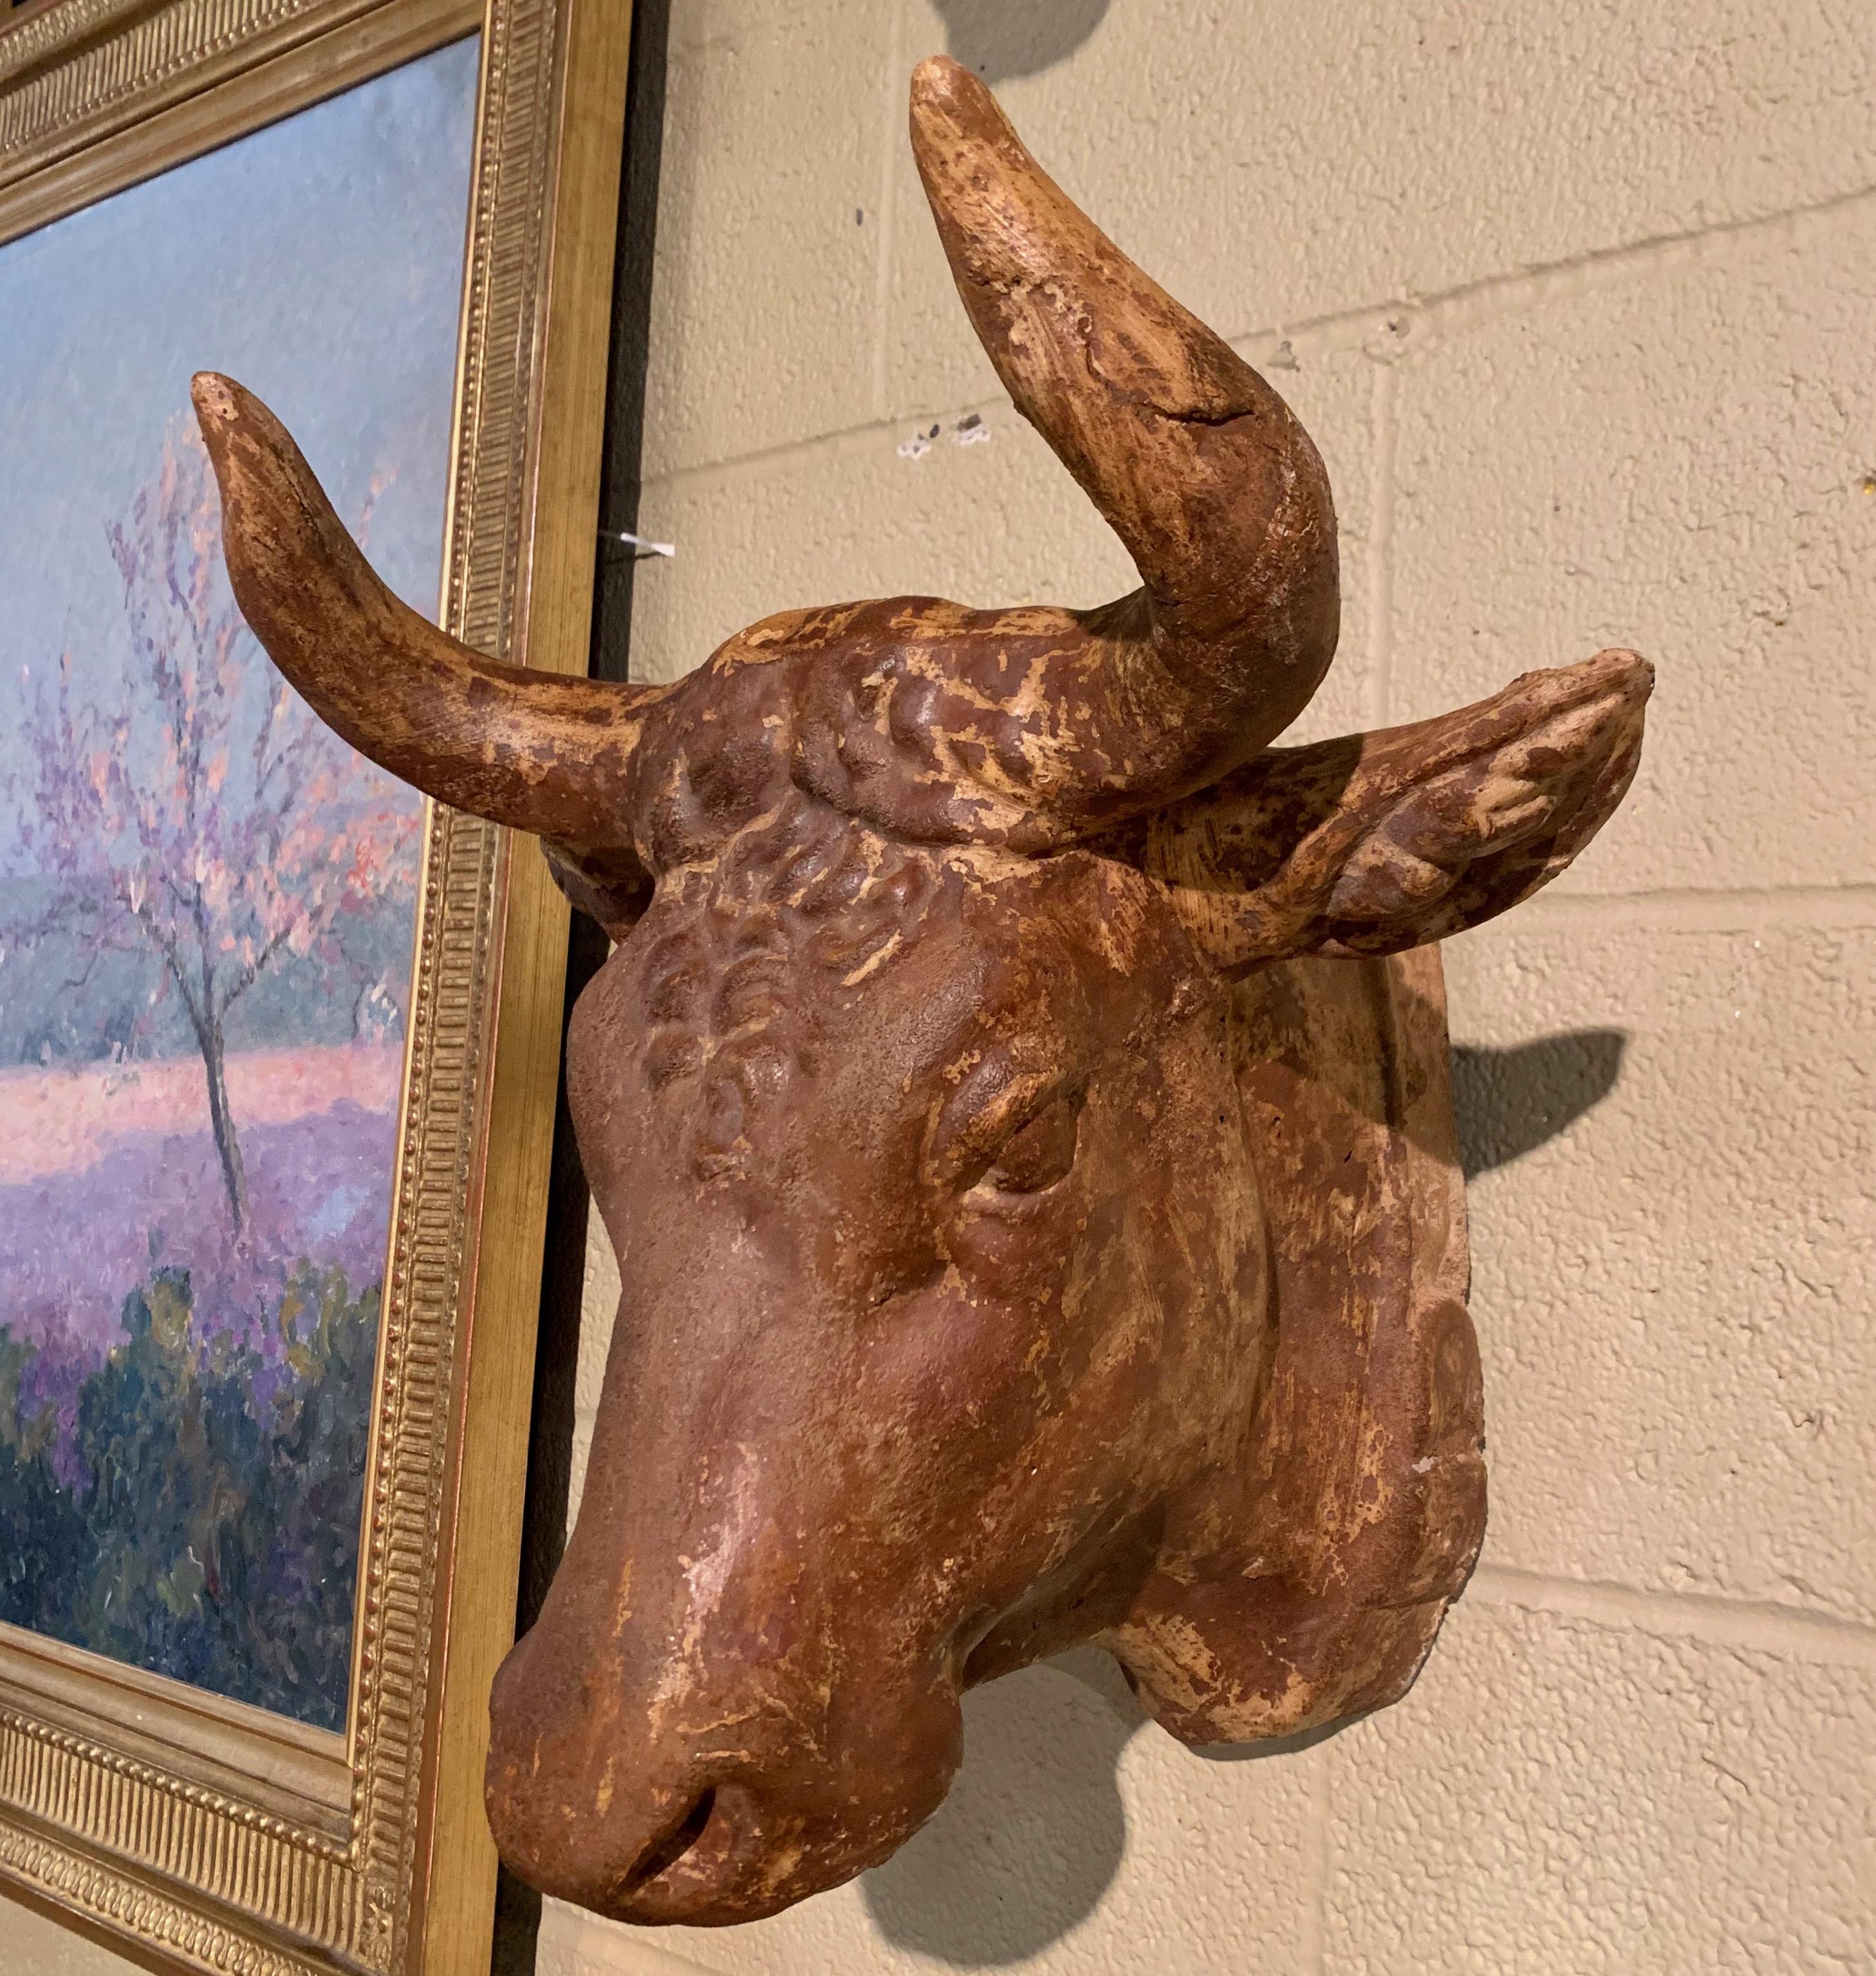 This beautiful antique cow head bust was crafted in France, circa 1950. Made of terracotta, the sculpture features a realistic cow head embellished with a collar in relief around the neck. The sculptural butcher sign is in excellent condition and